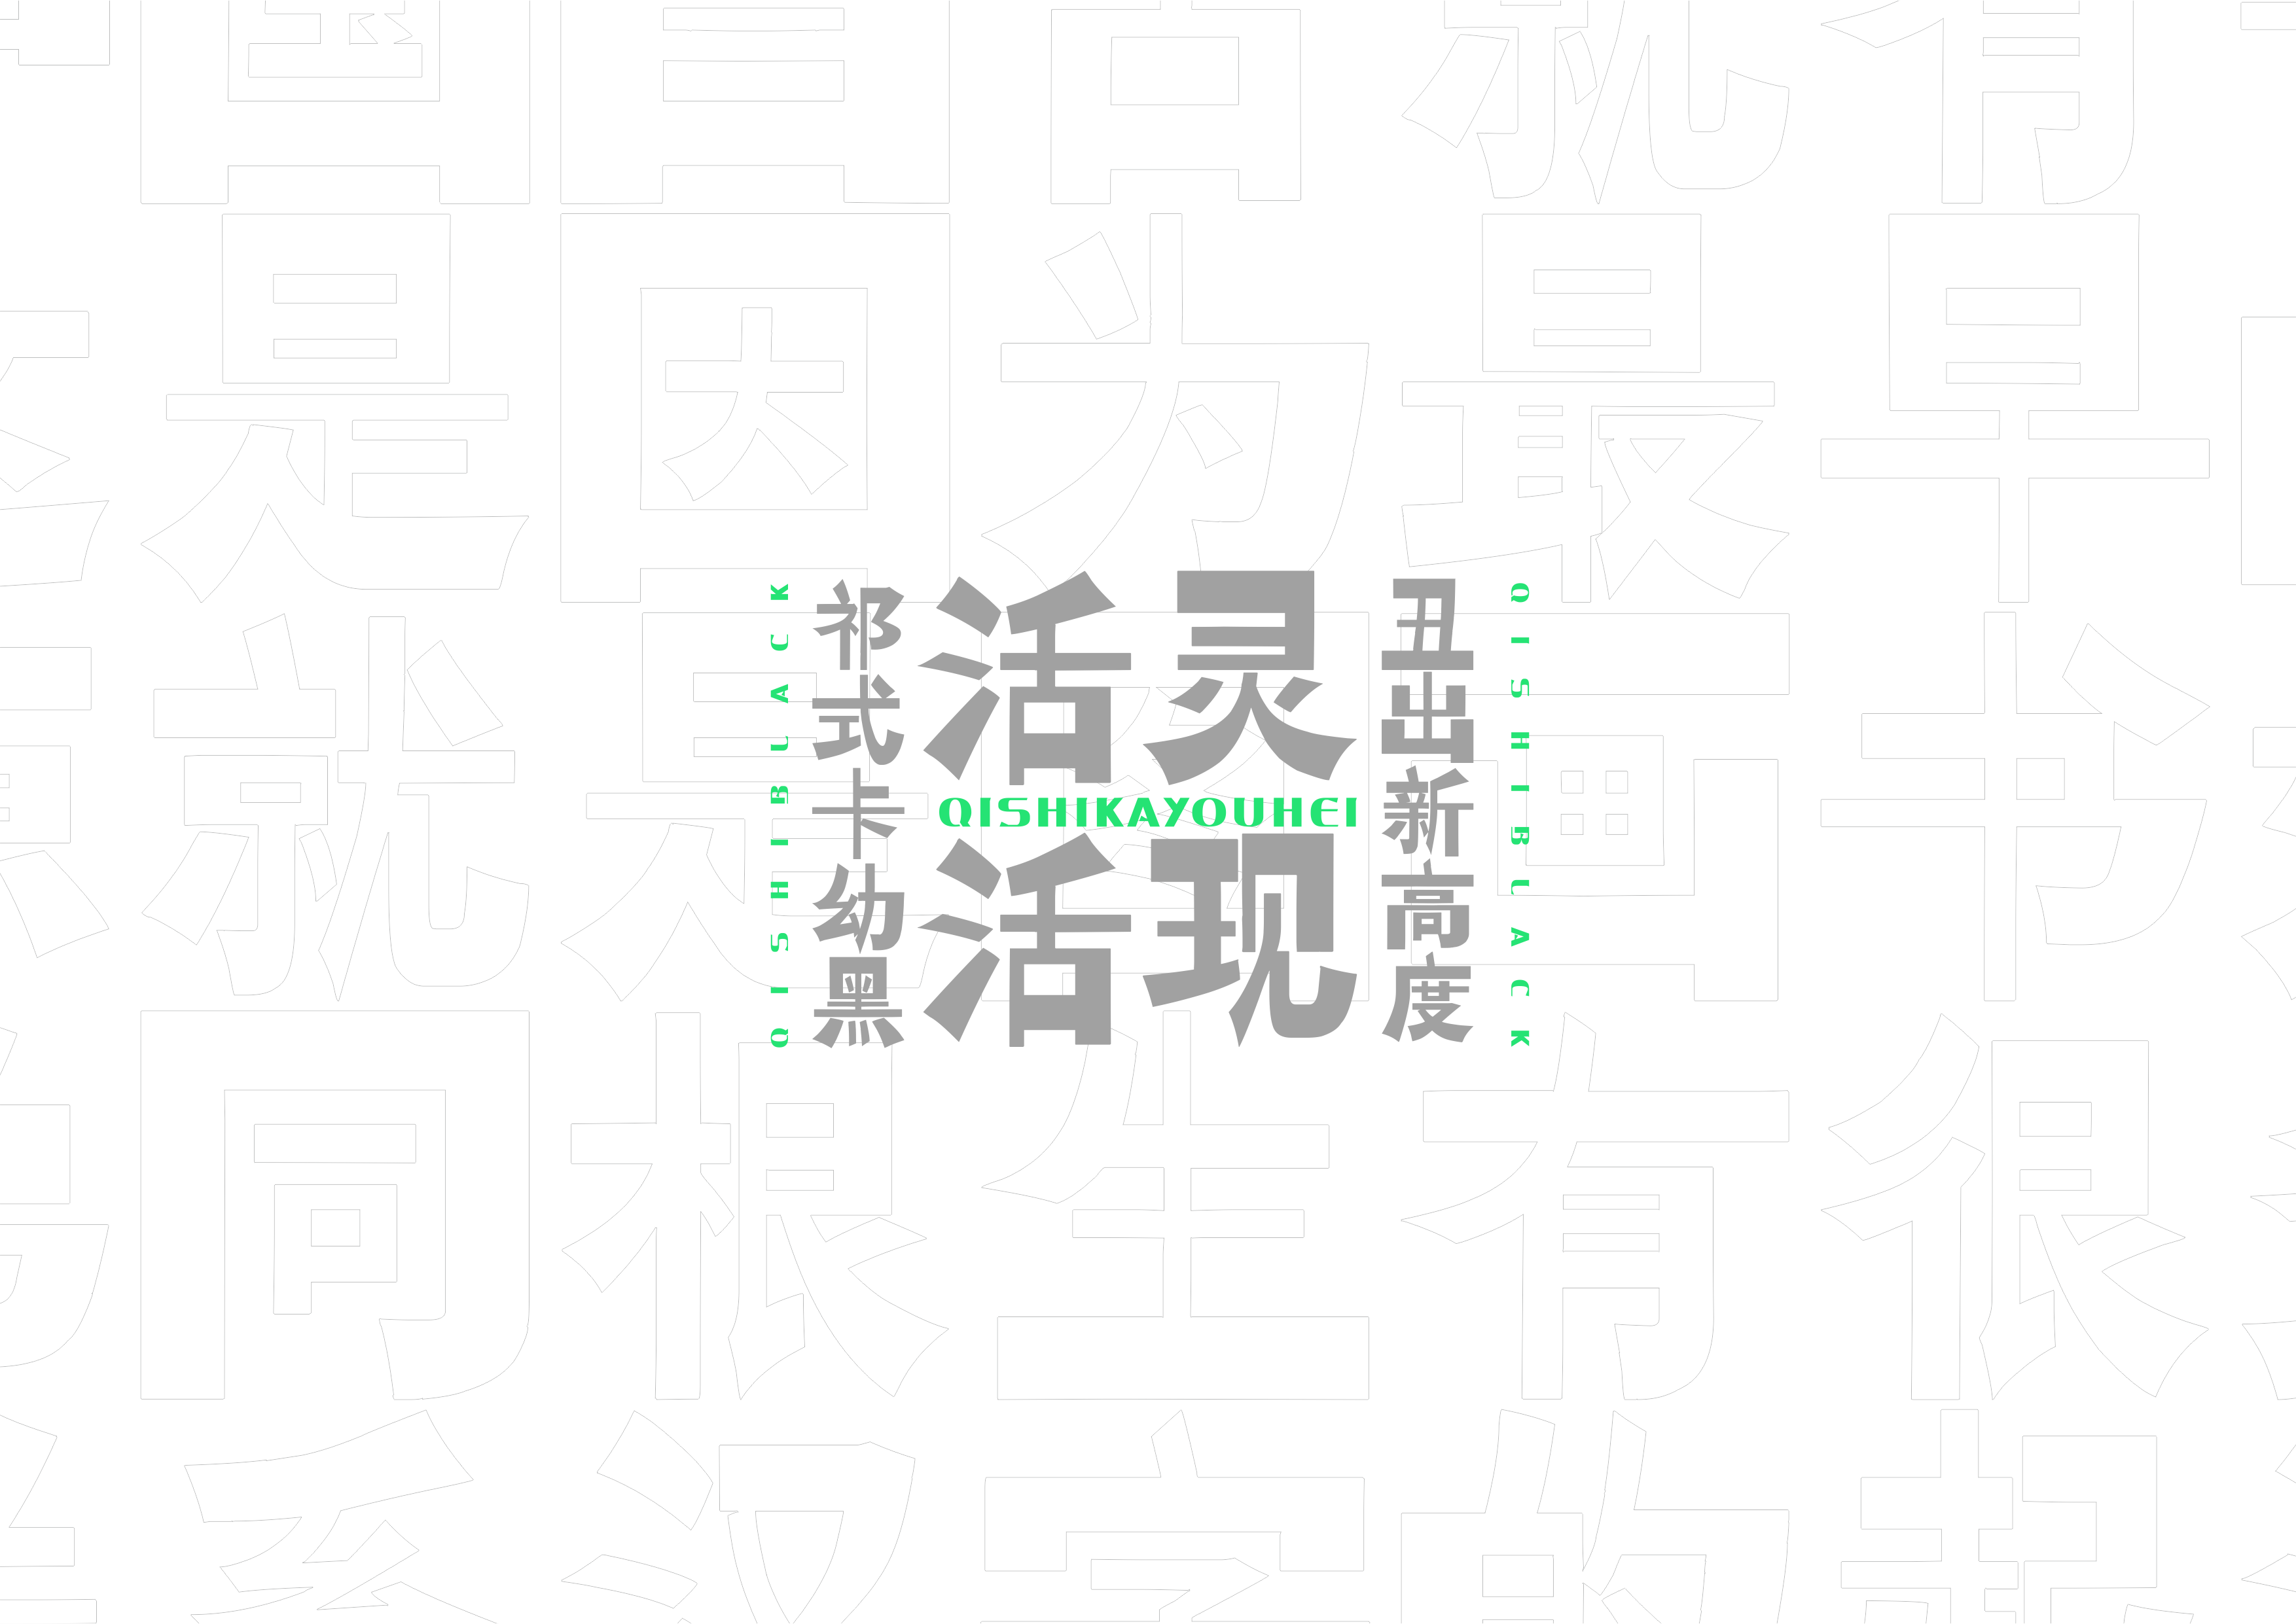 90P Collection of the latest Chinese font design schemes in 2021 #.47